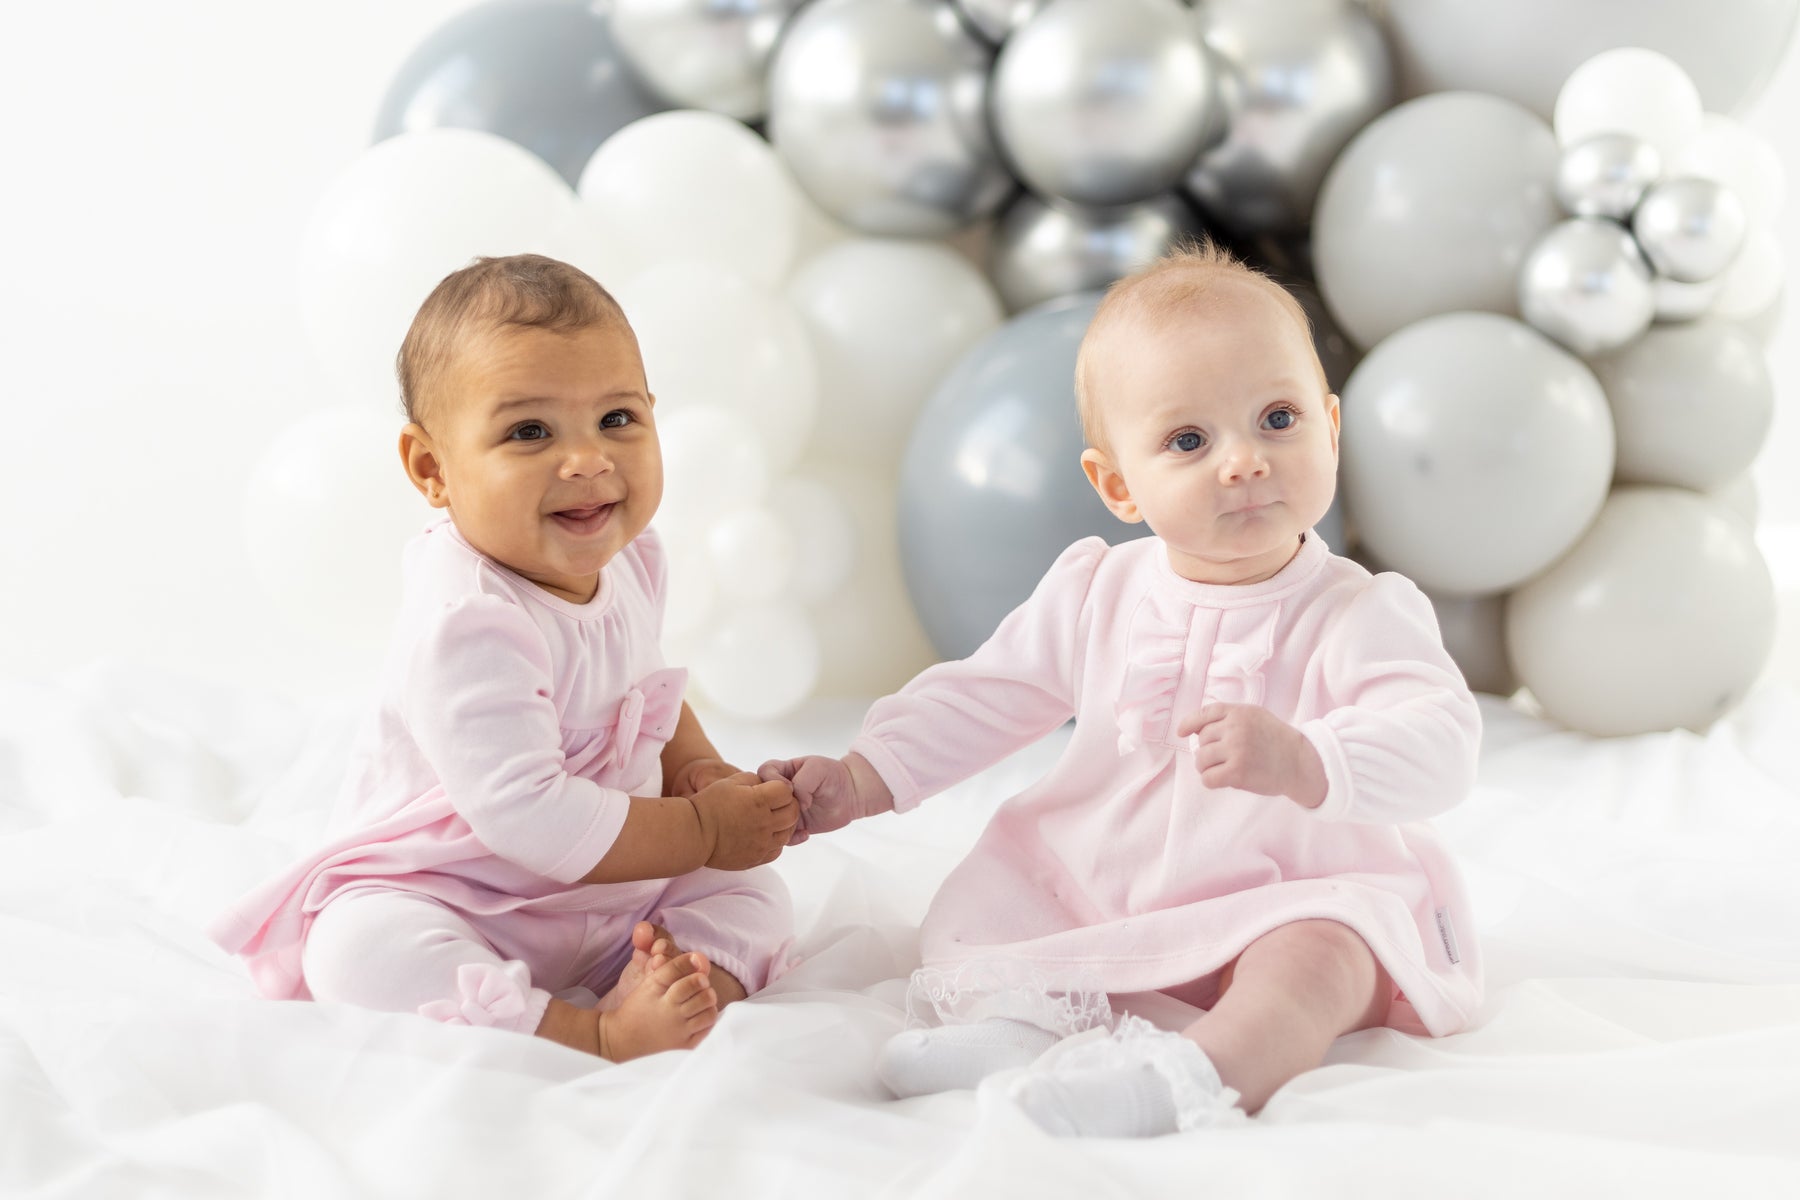 Blues Baby branded baby girls two piece top and legging set finished in a soft pastel pink colour. This set consists of a round neck tunic top with long sleeves, it has a diamanté bow detail to the middle and on the ankles on the leggings. Available in sizes 3 month up to 12 month.